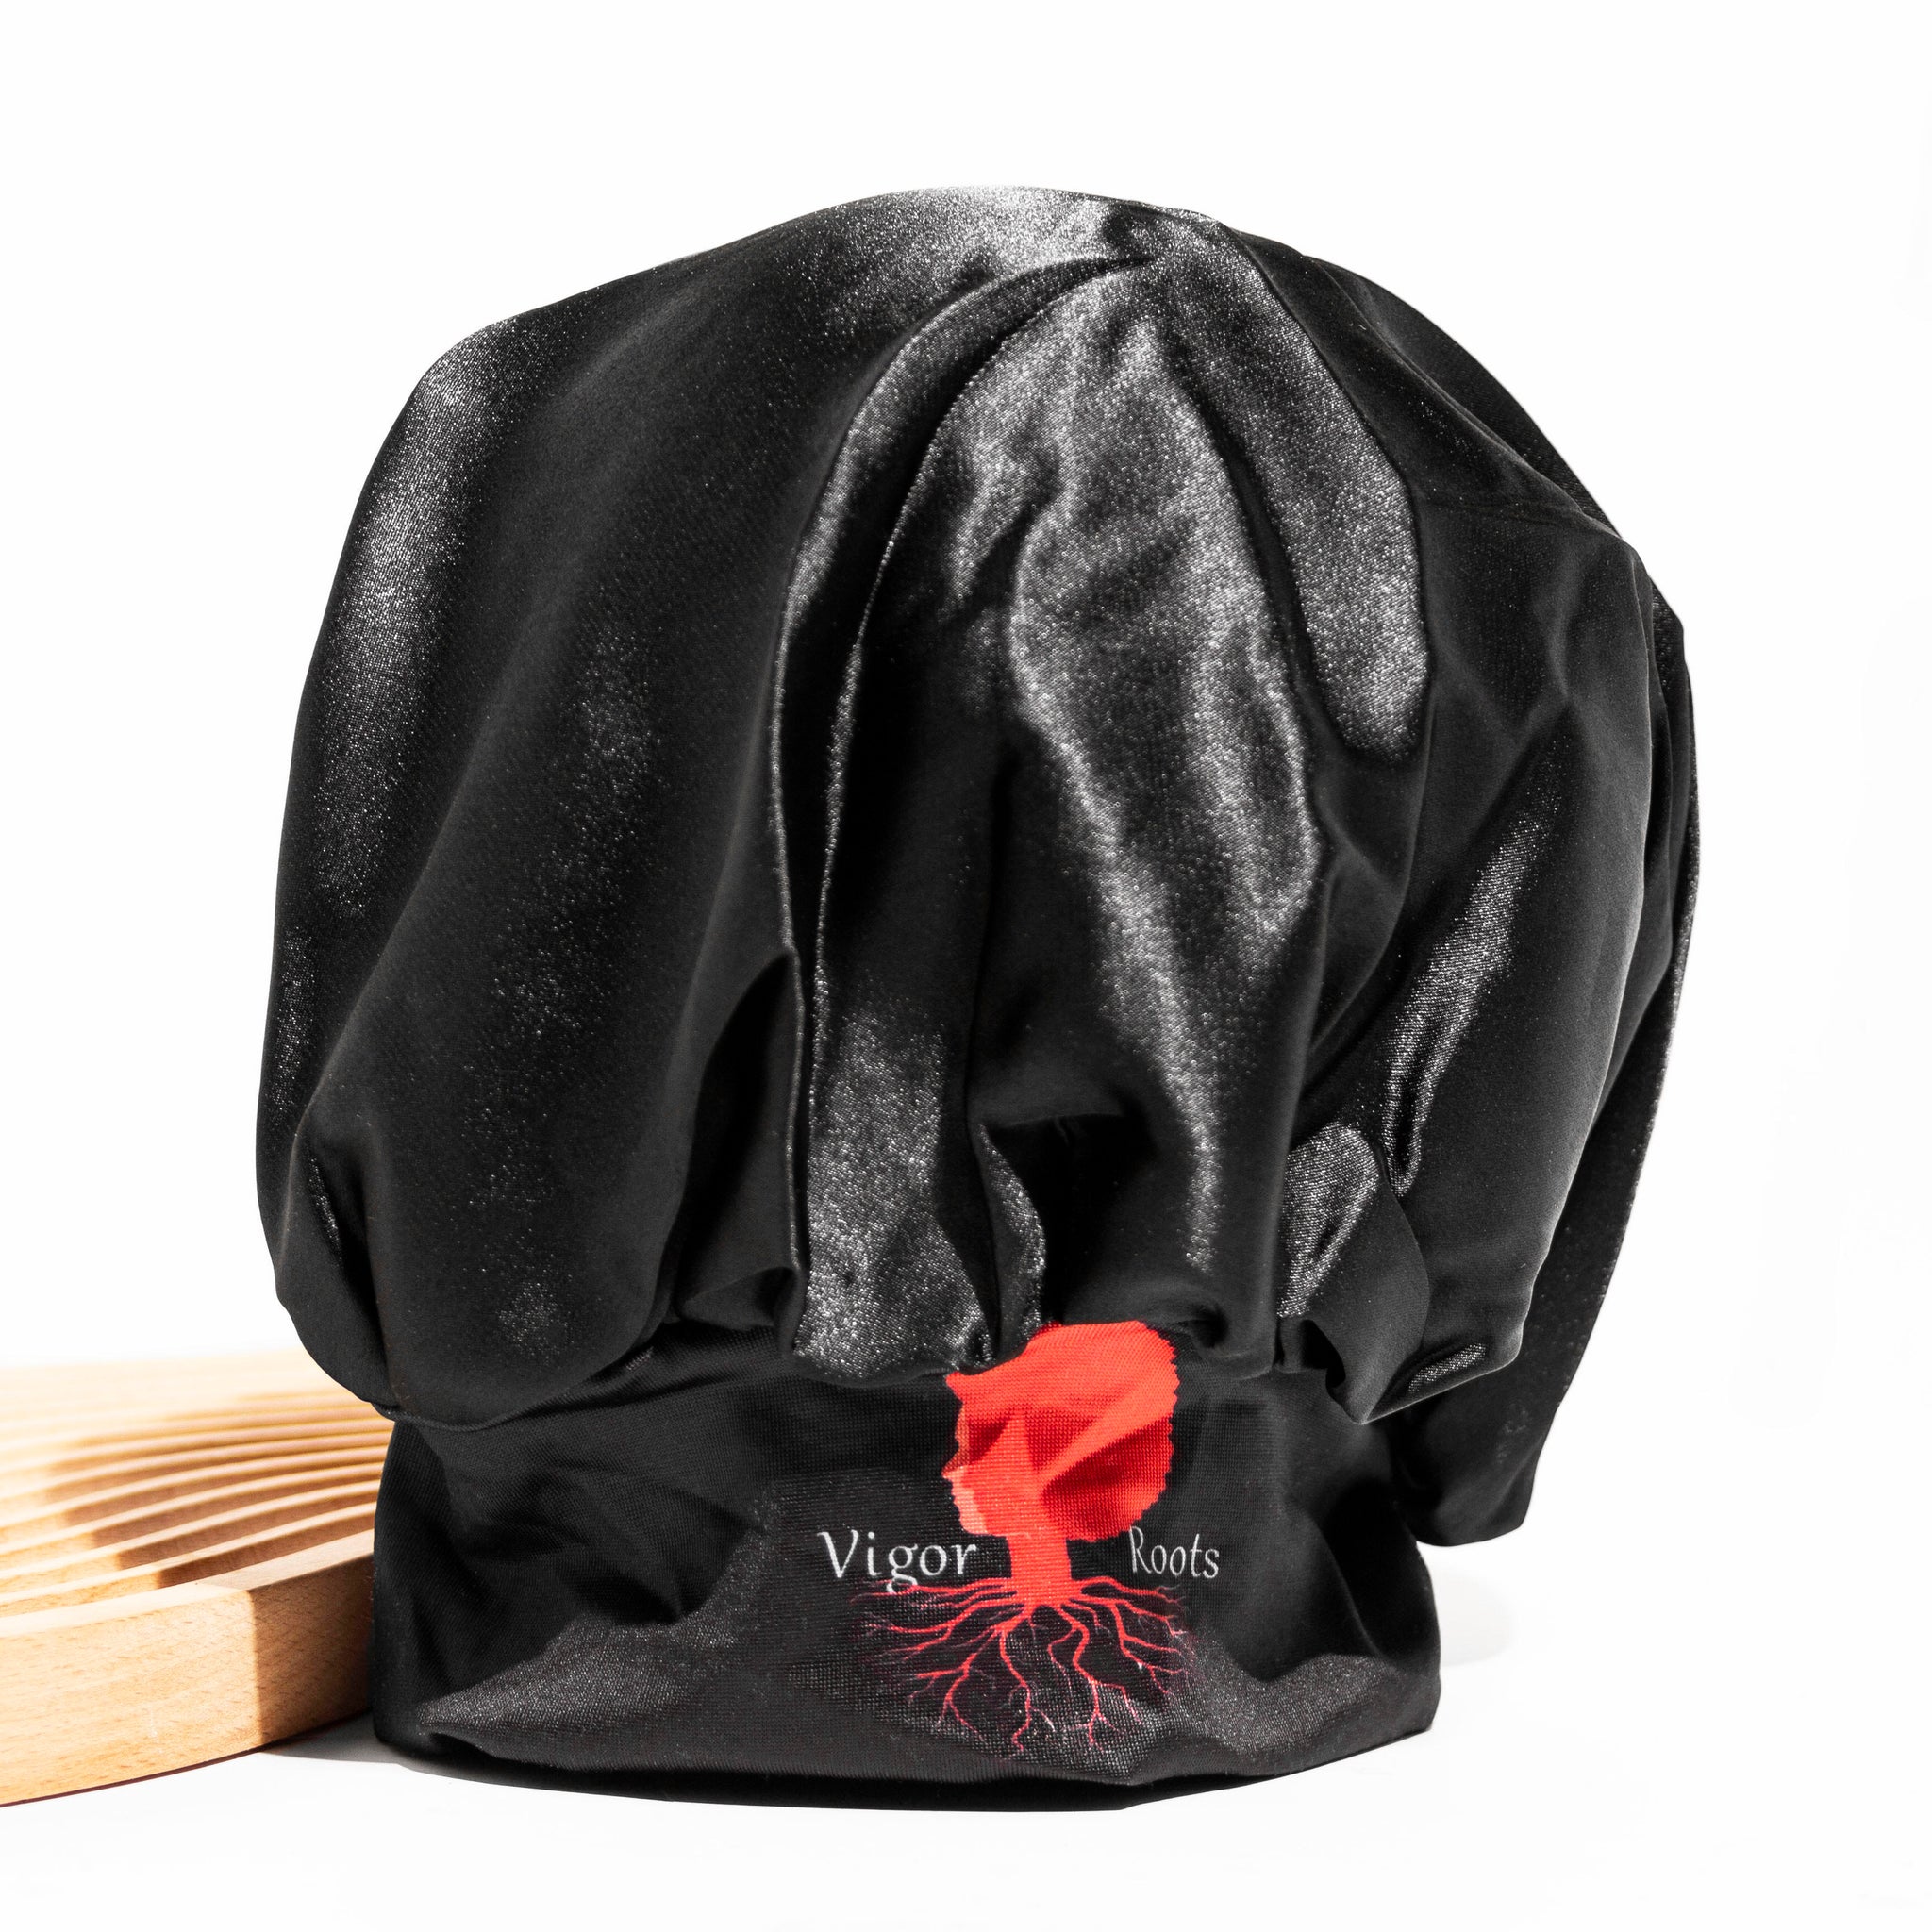 Safeguard your hair from damaging friction and look gorgeous while doing so with the Vigor Roots Satin Bonnet.